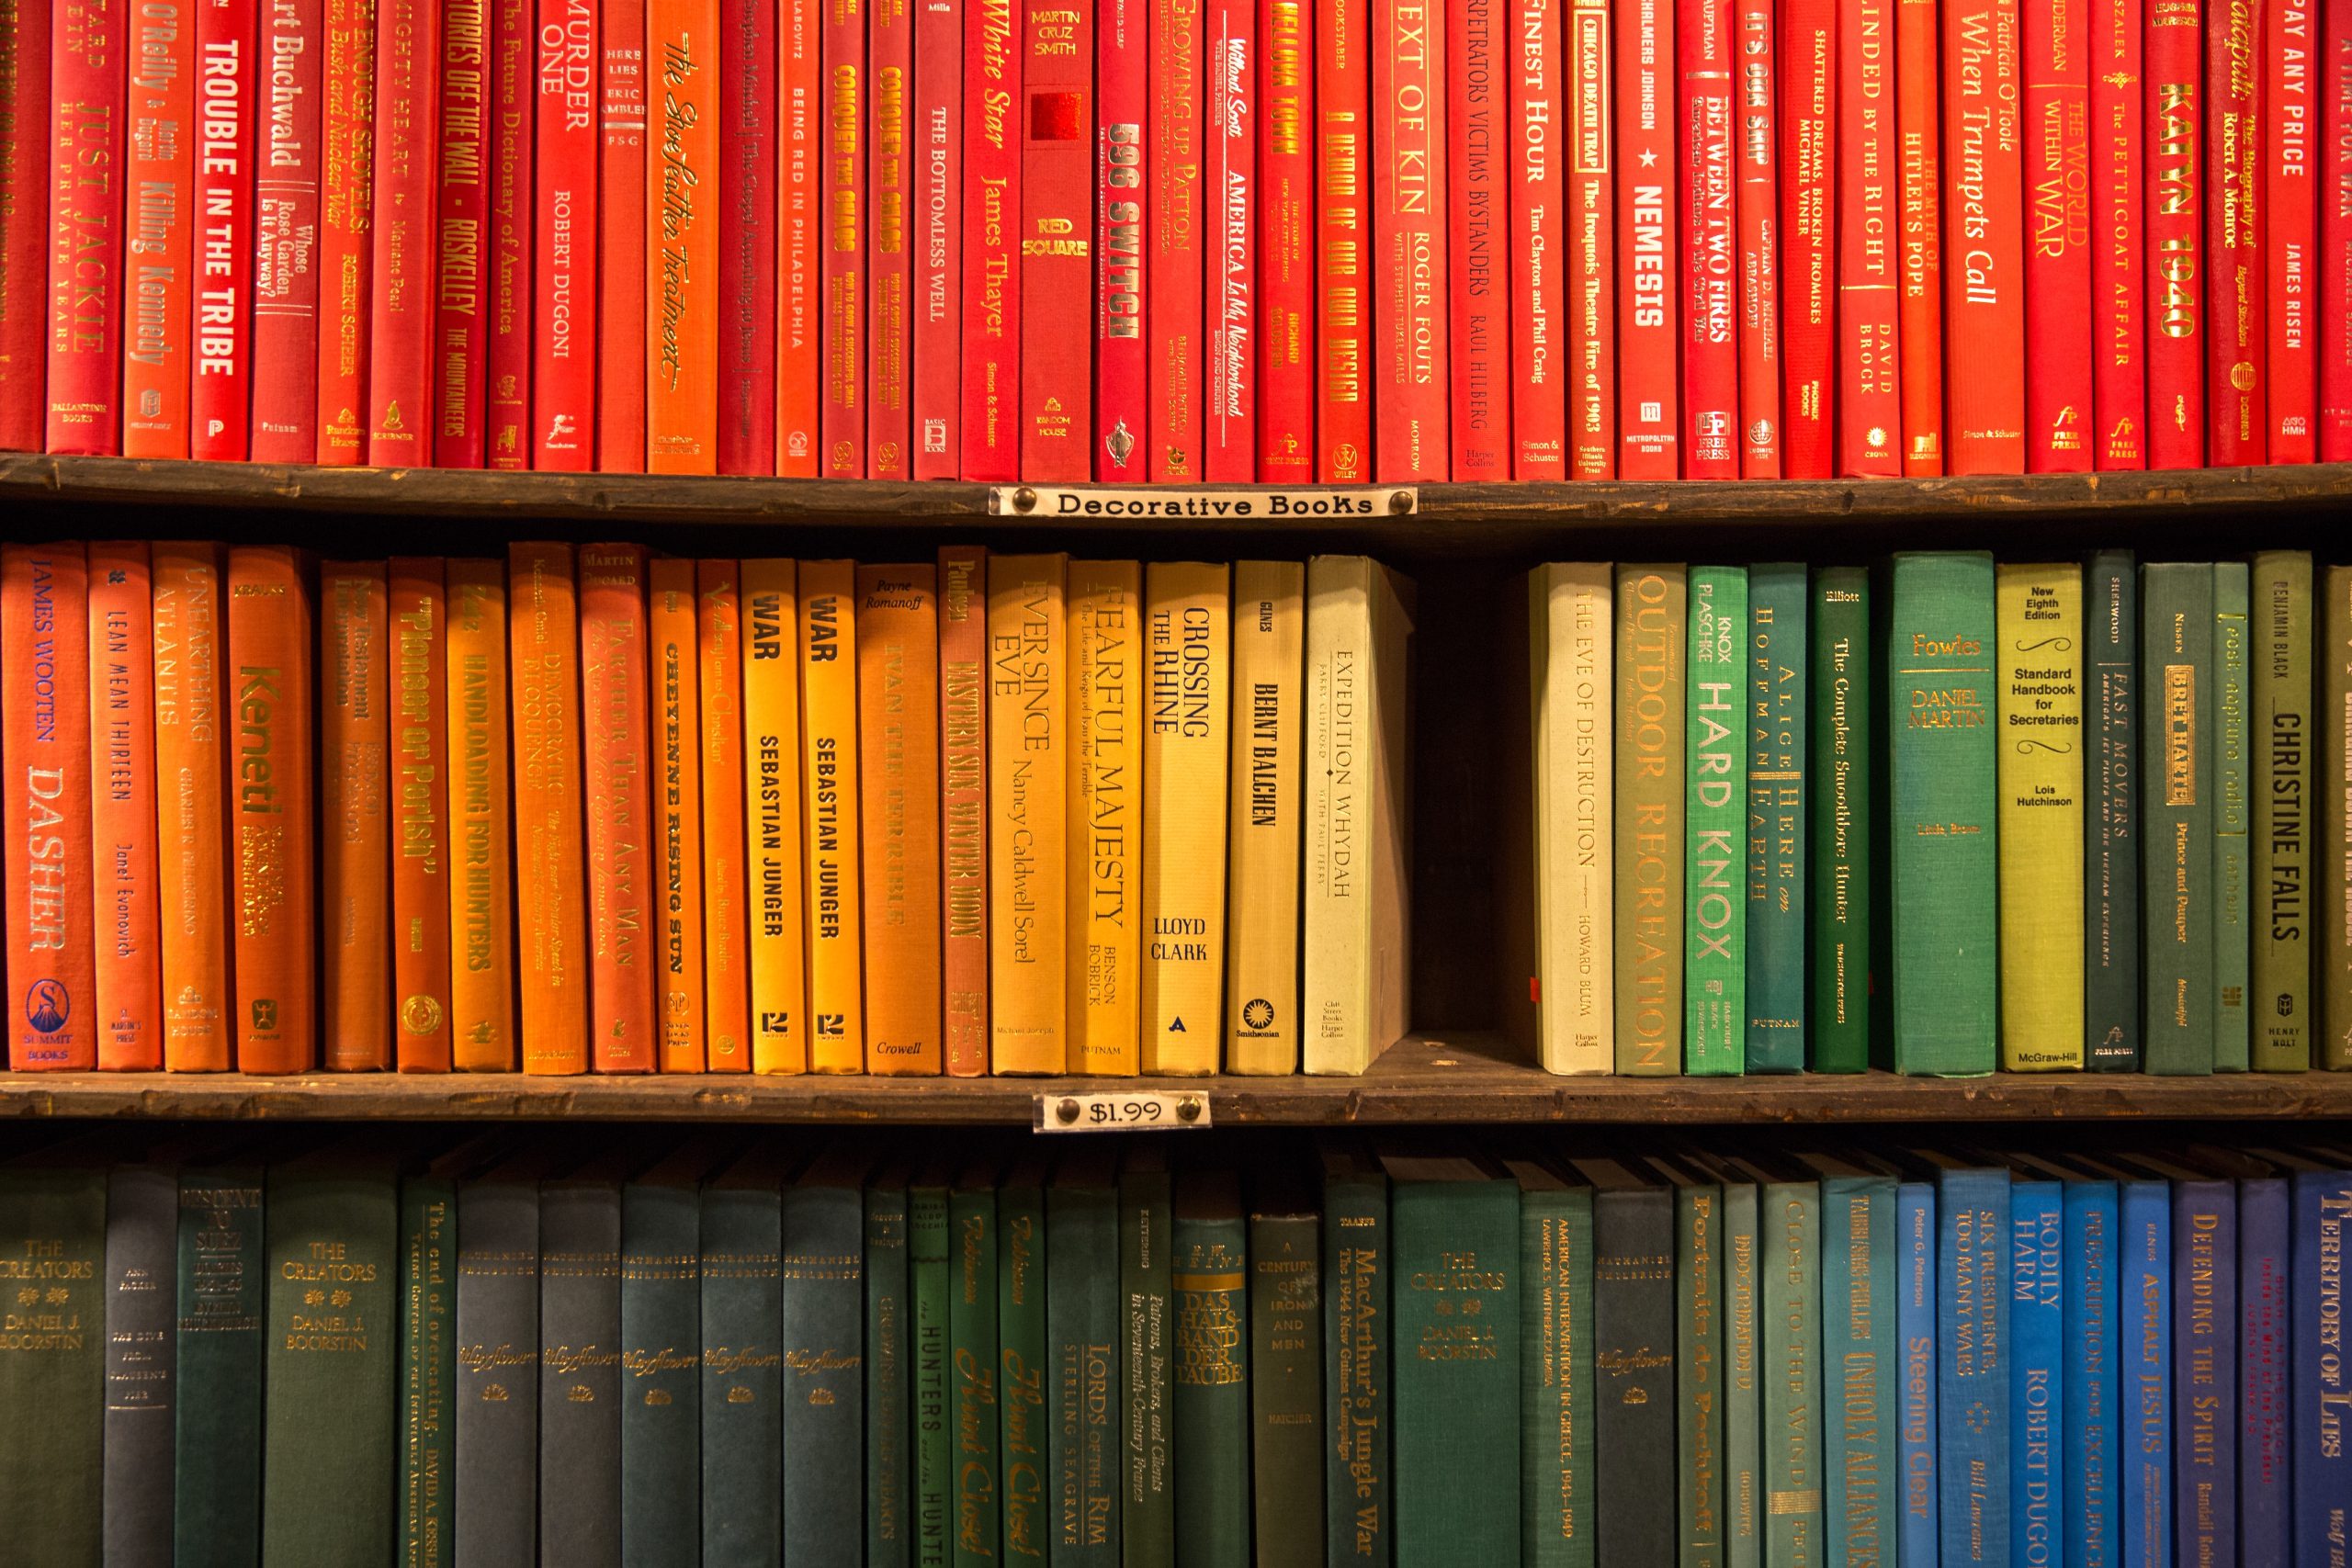 Three shelves filled with books in rainbow color order. Photo by Jason Leung on Unsplash.